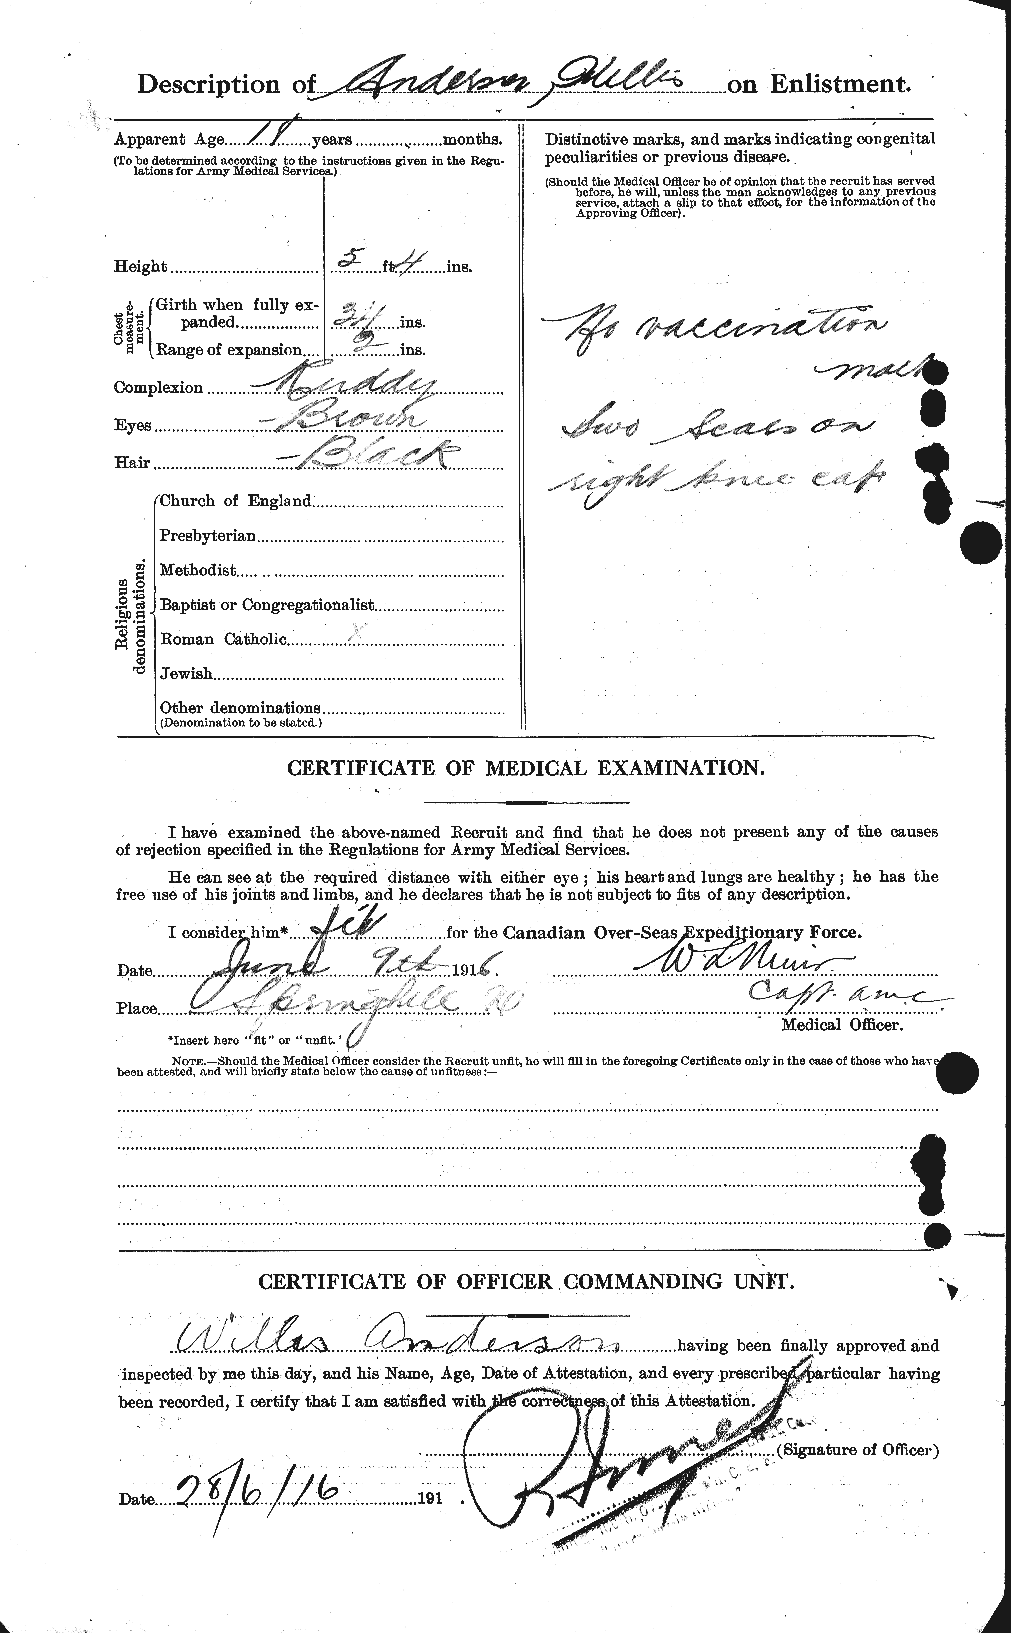 Personnel Records of the First World War - CEF 210852b